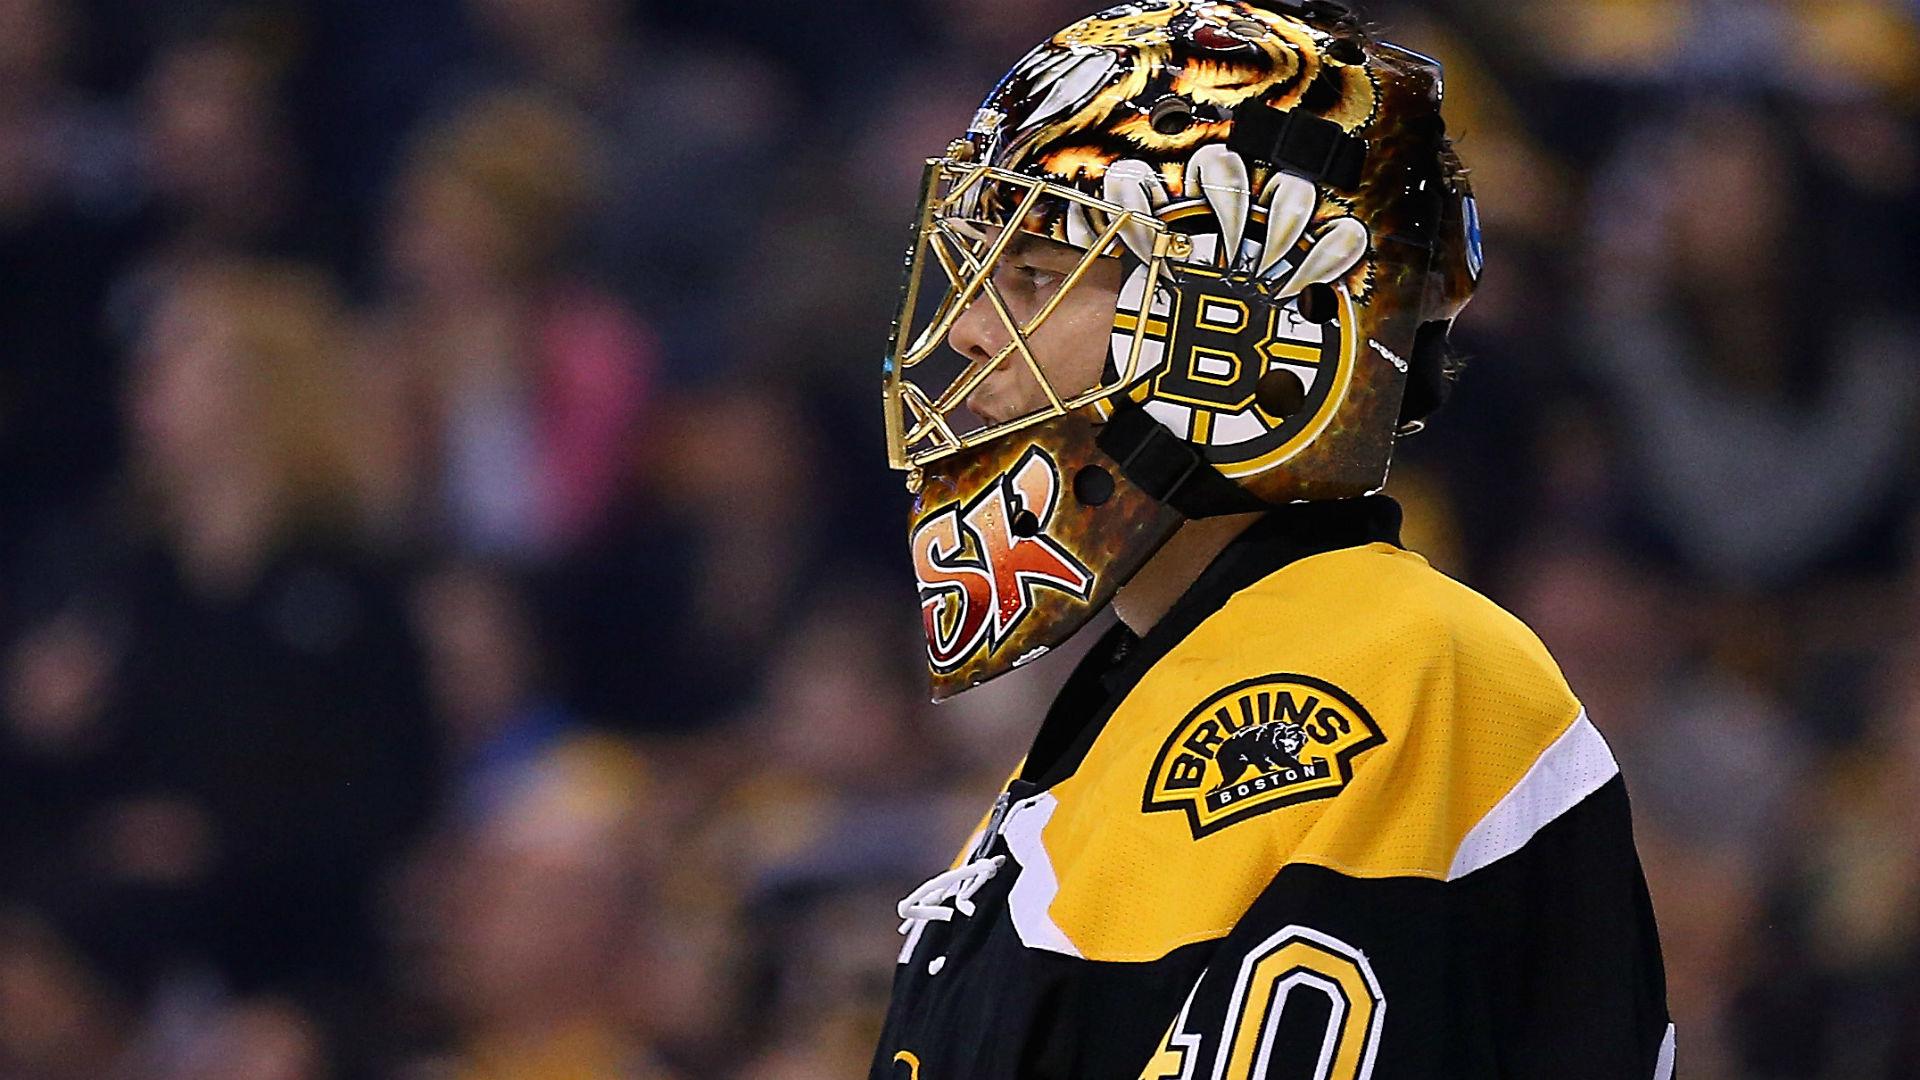 Bruins G Tuukka Rask leaves game after sustaining concussion